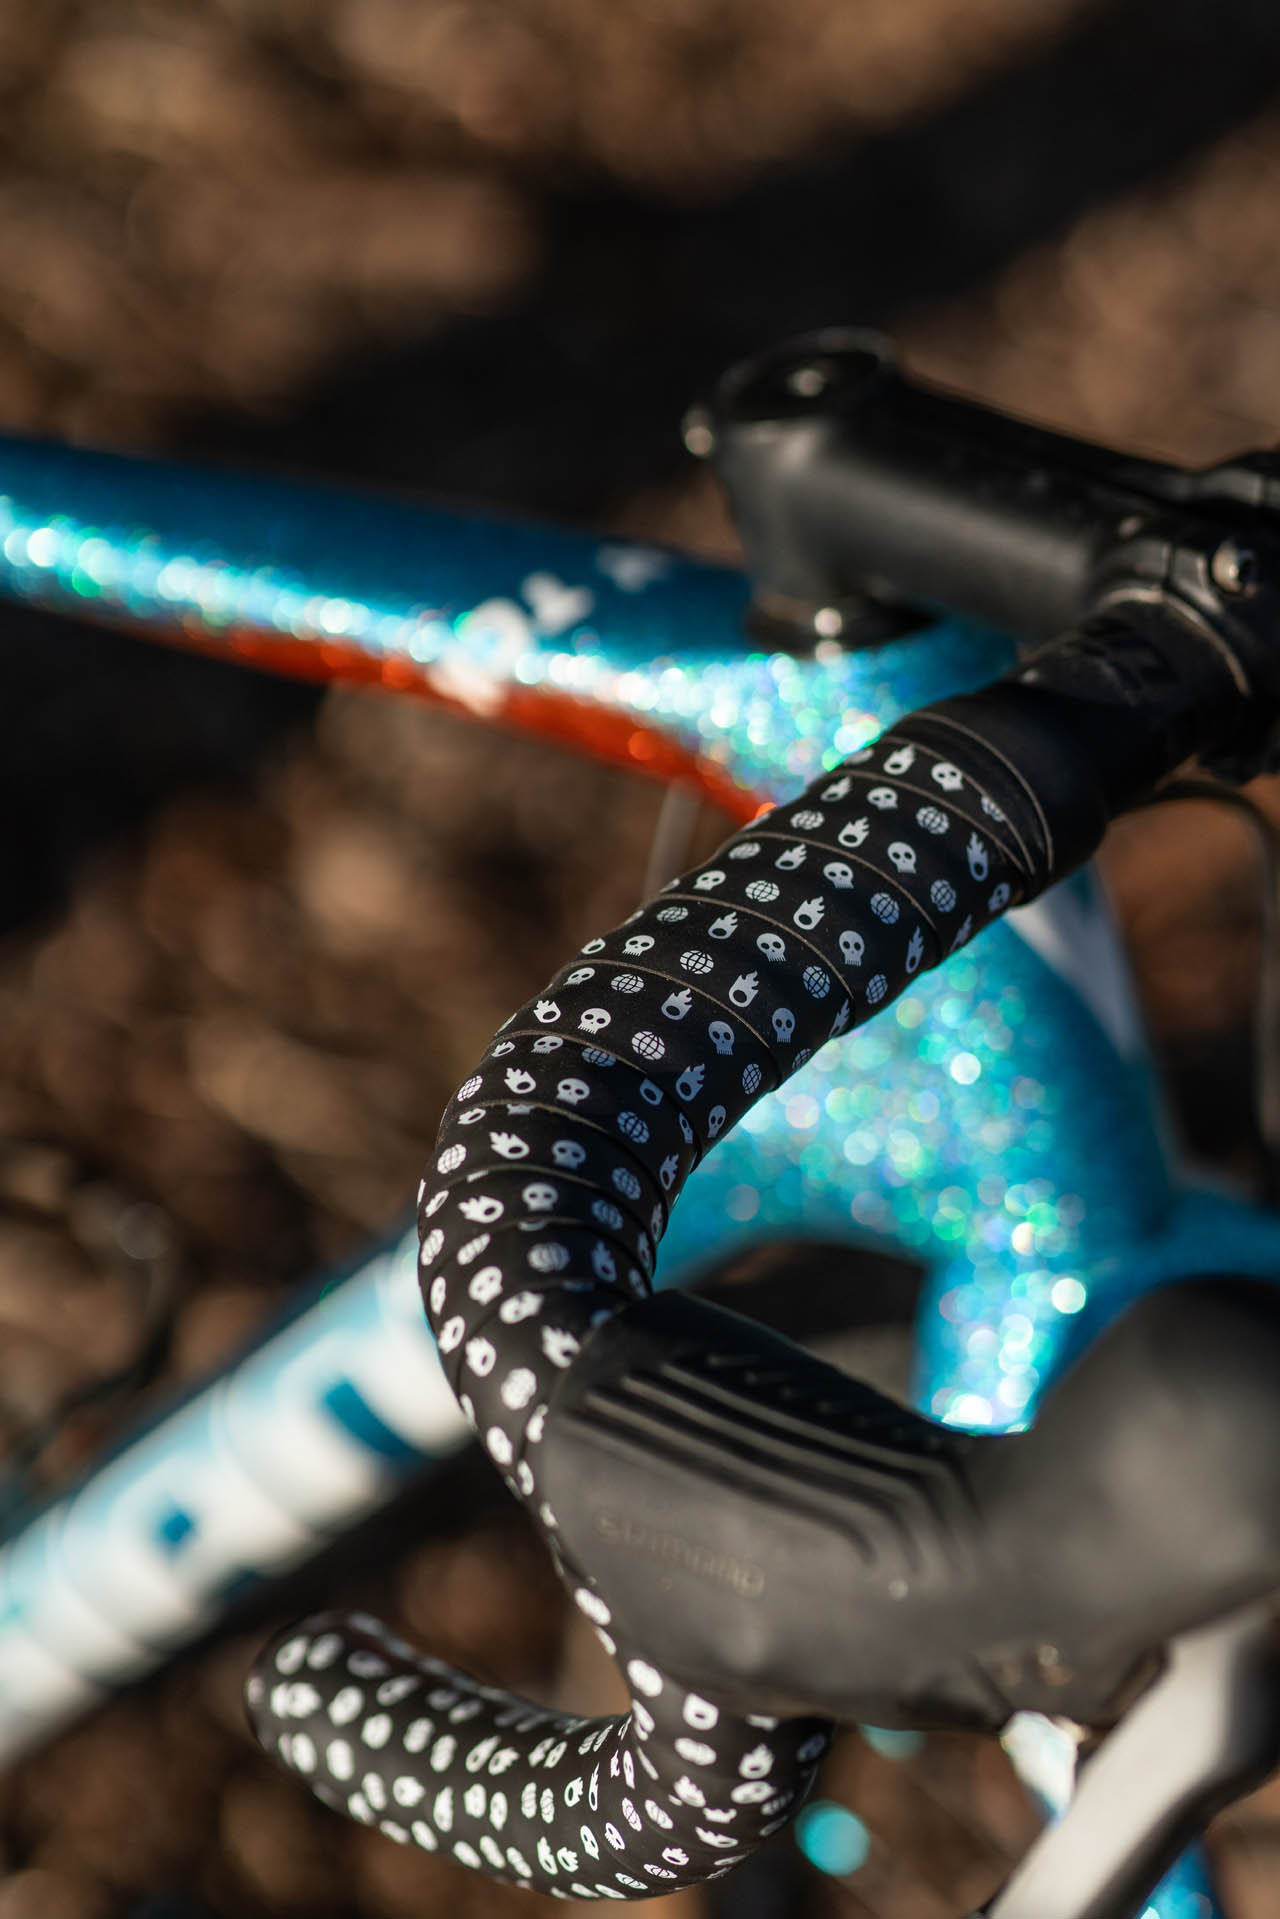 Burgh Cycling - There's no need for gloves when your tape can feel this  good. Our Mosaic Stealth tape shining a light on comfort! -⁠ 📷: Monkey  Cycle -⁠ #burghcycling #bartape #cyclocross #